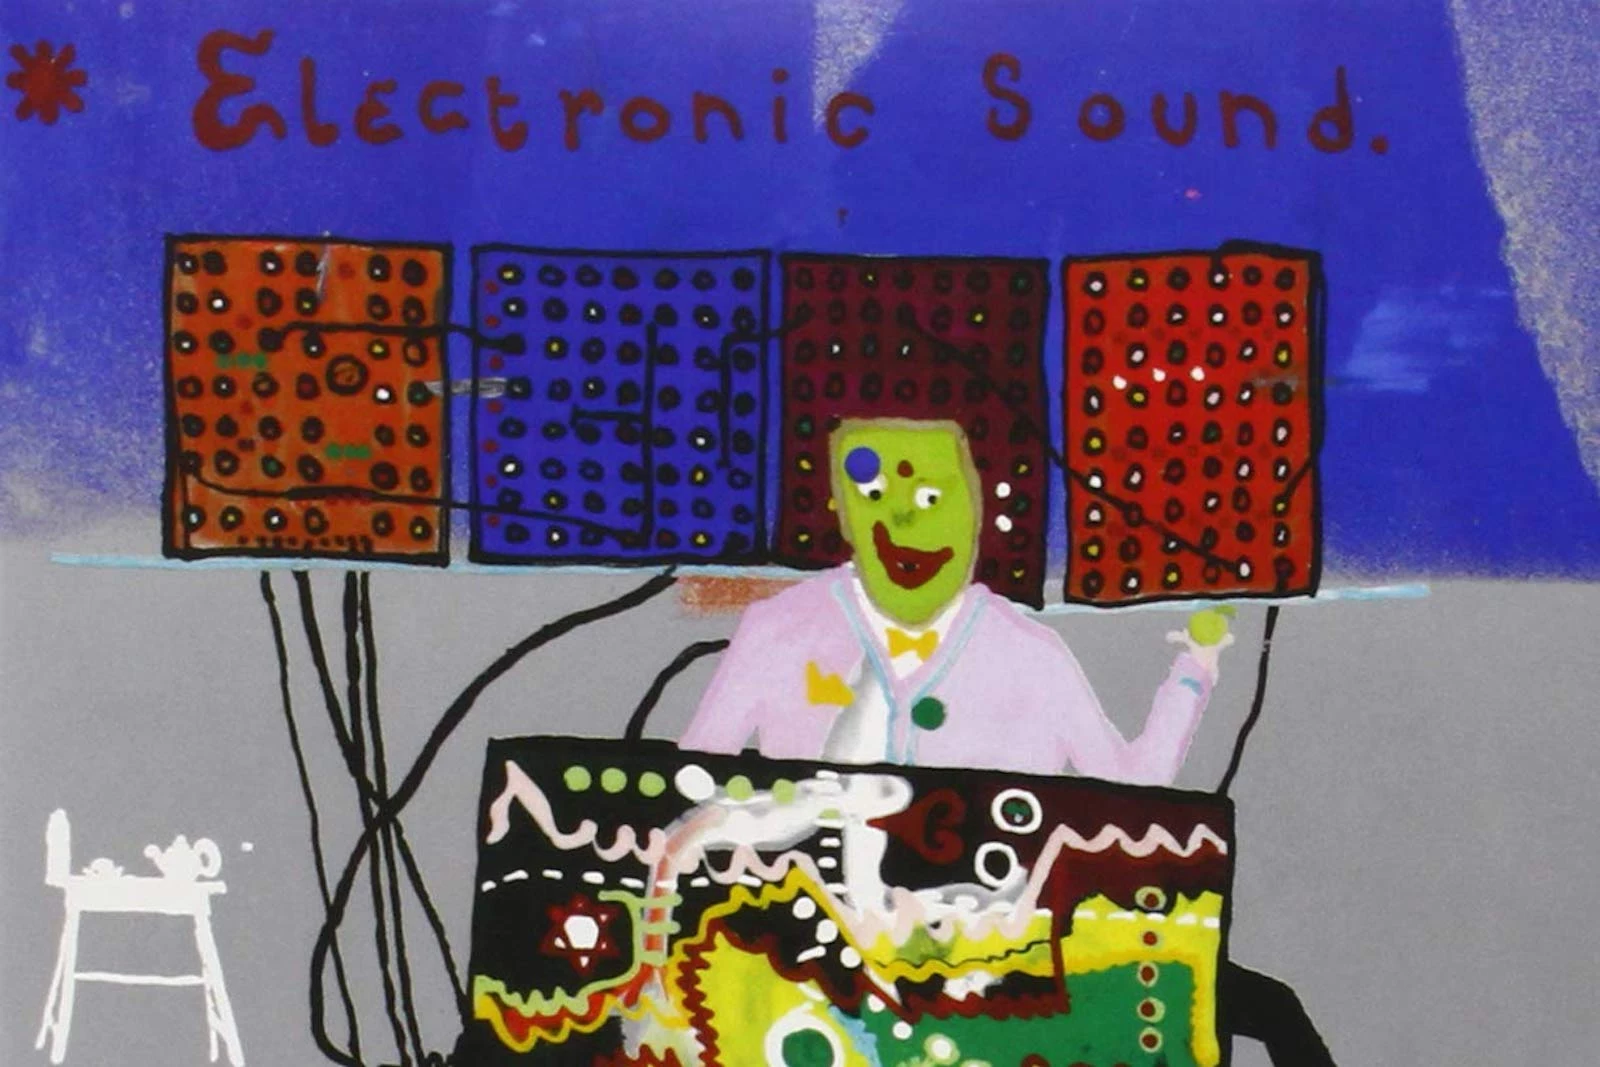 How George Harrison's 'Electronic Sound' Pointed to Bigger Things